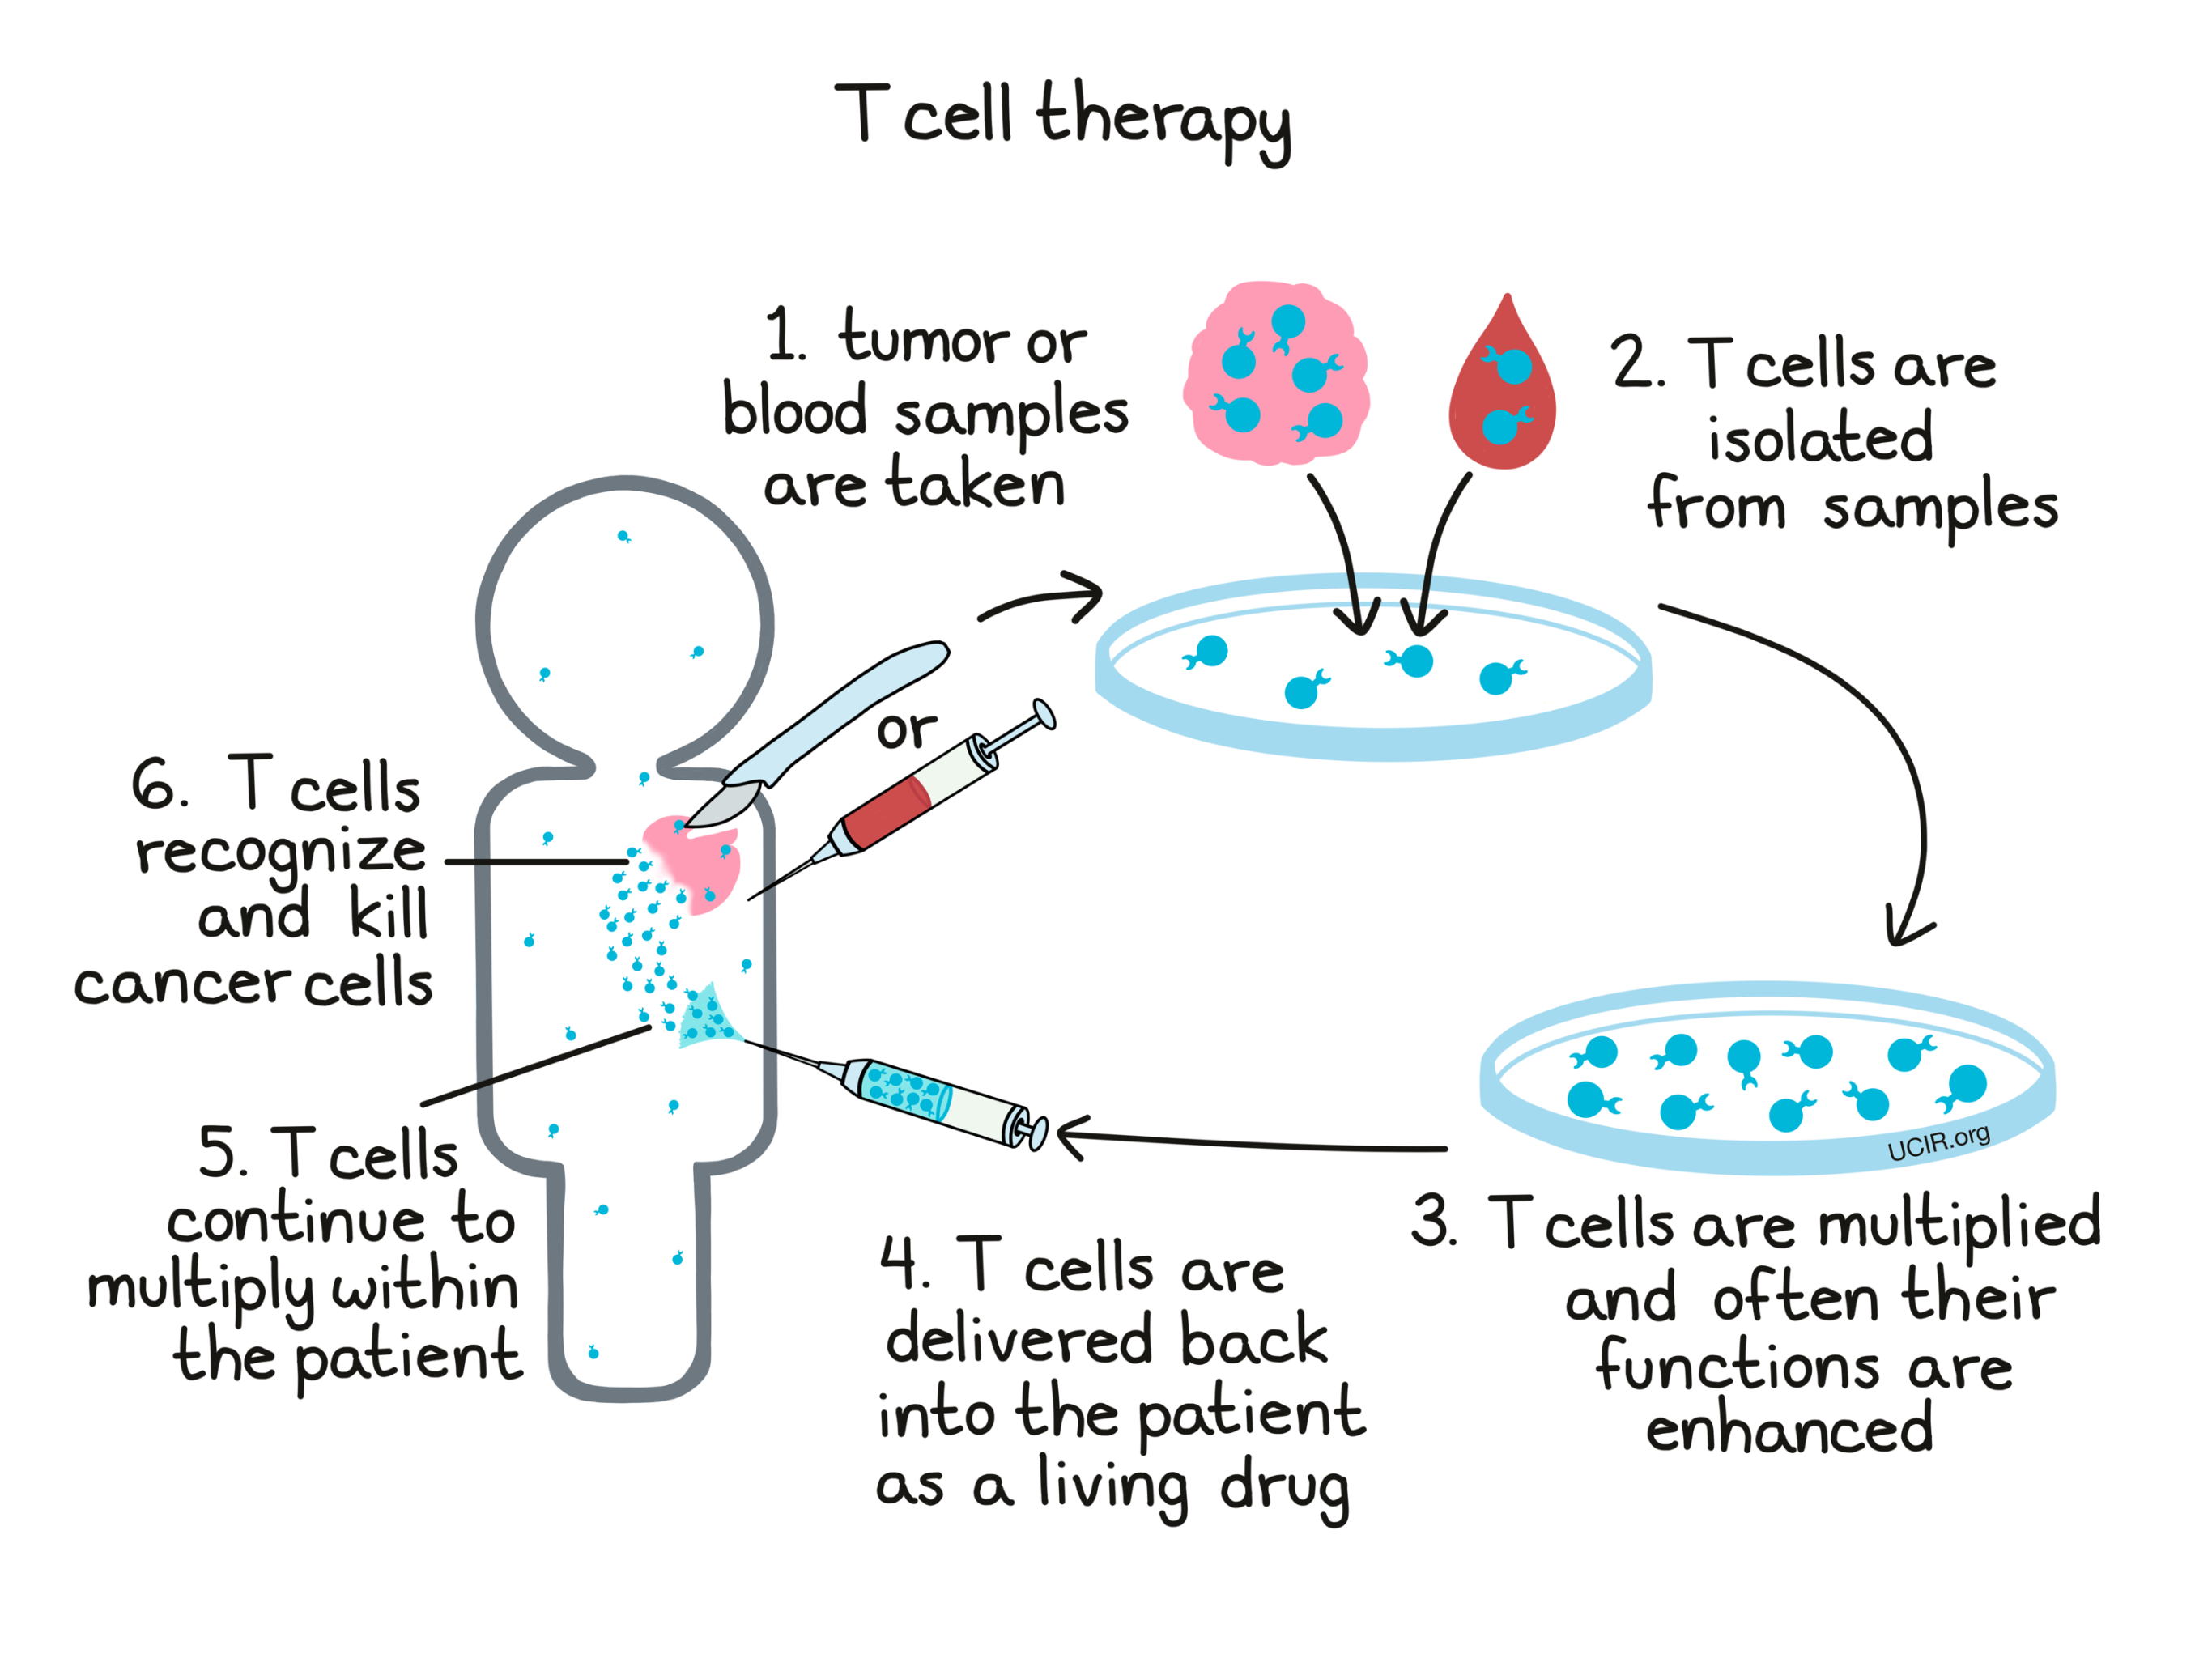 Overview of T cell therapy